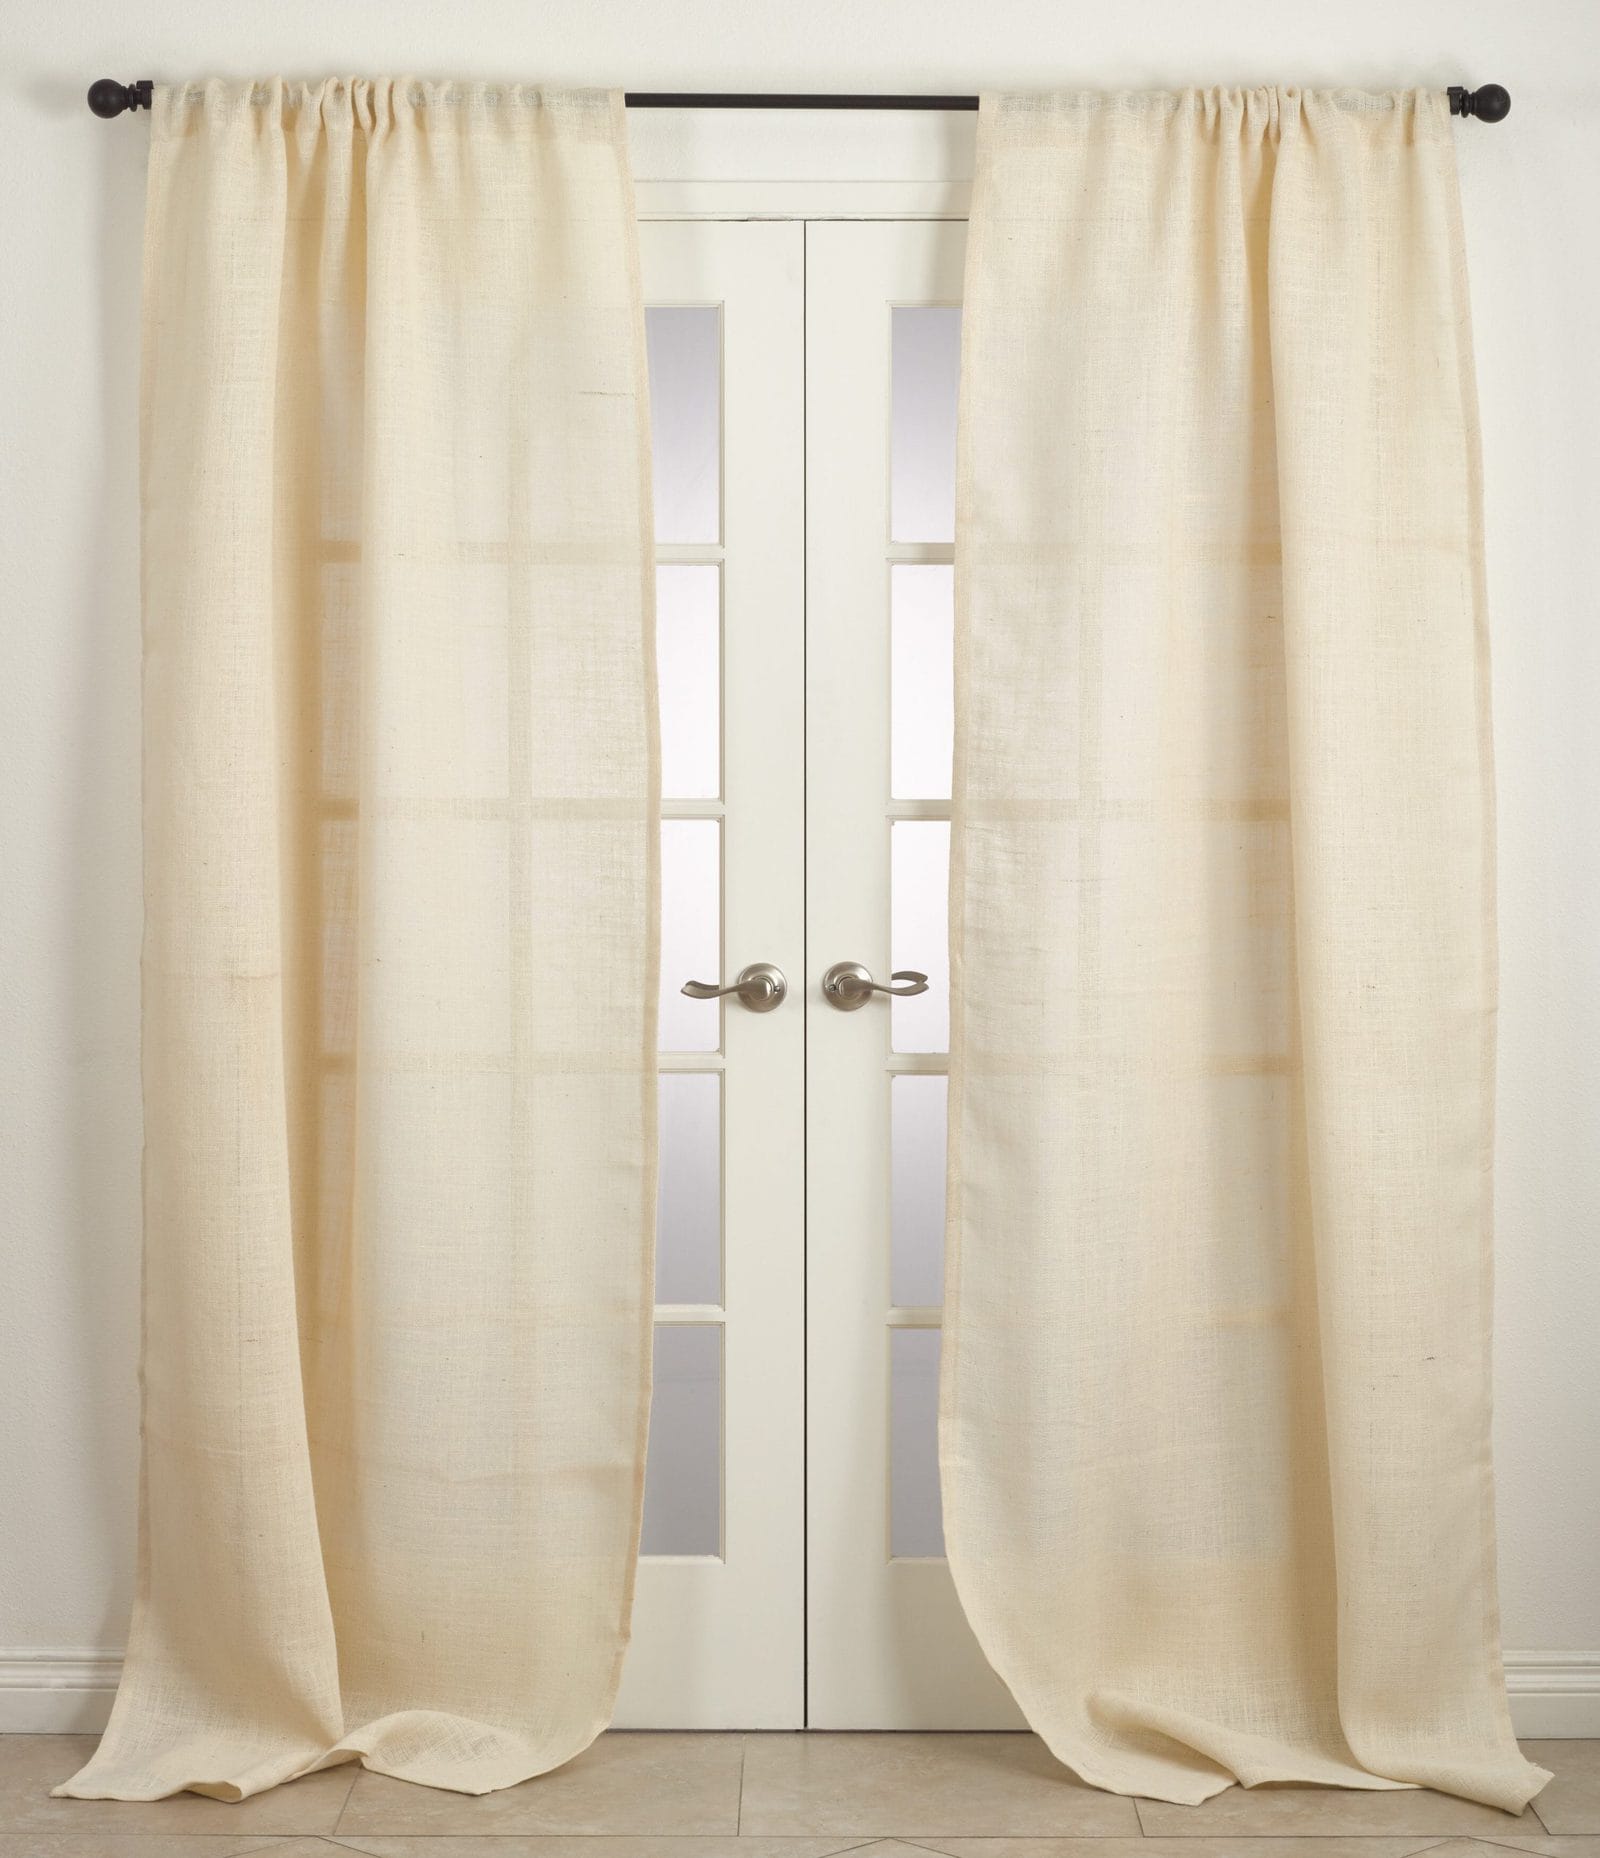 <strong>Burlap Curtains for a Rustic Look</strong>